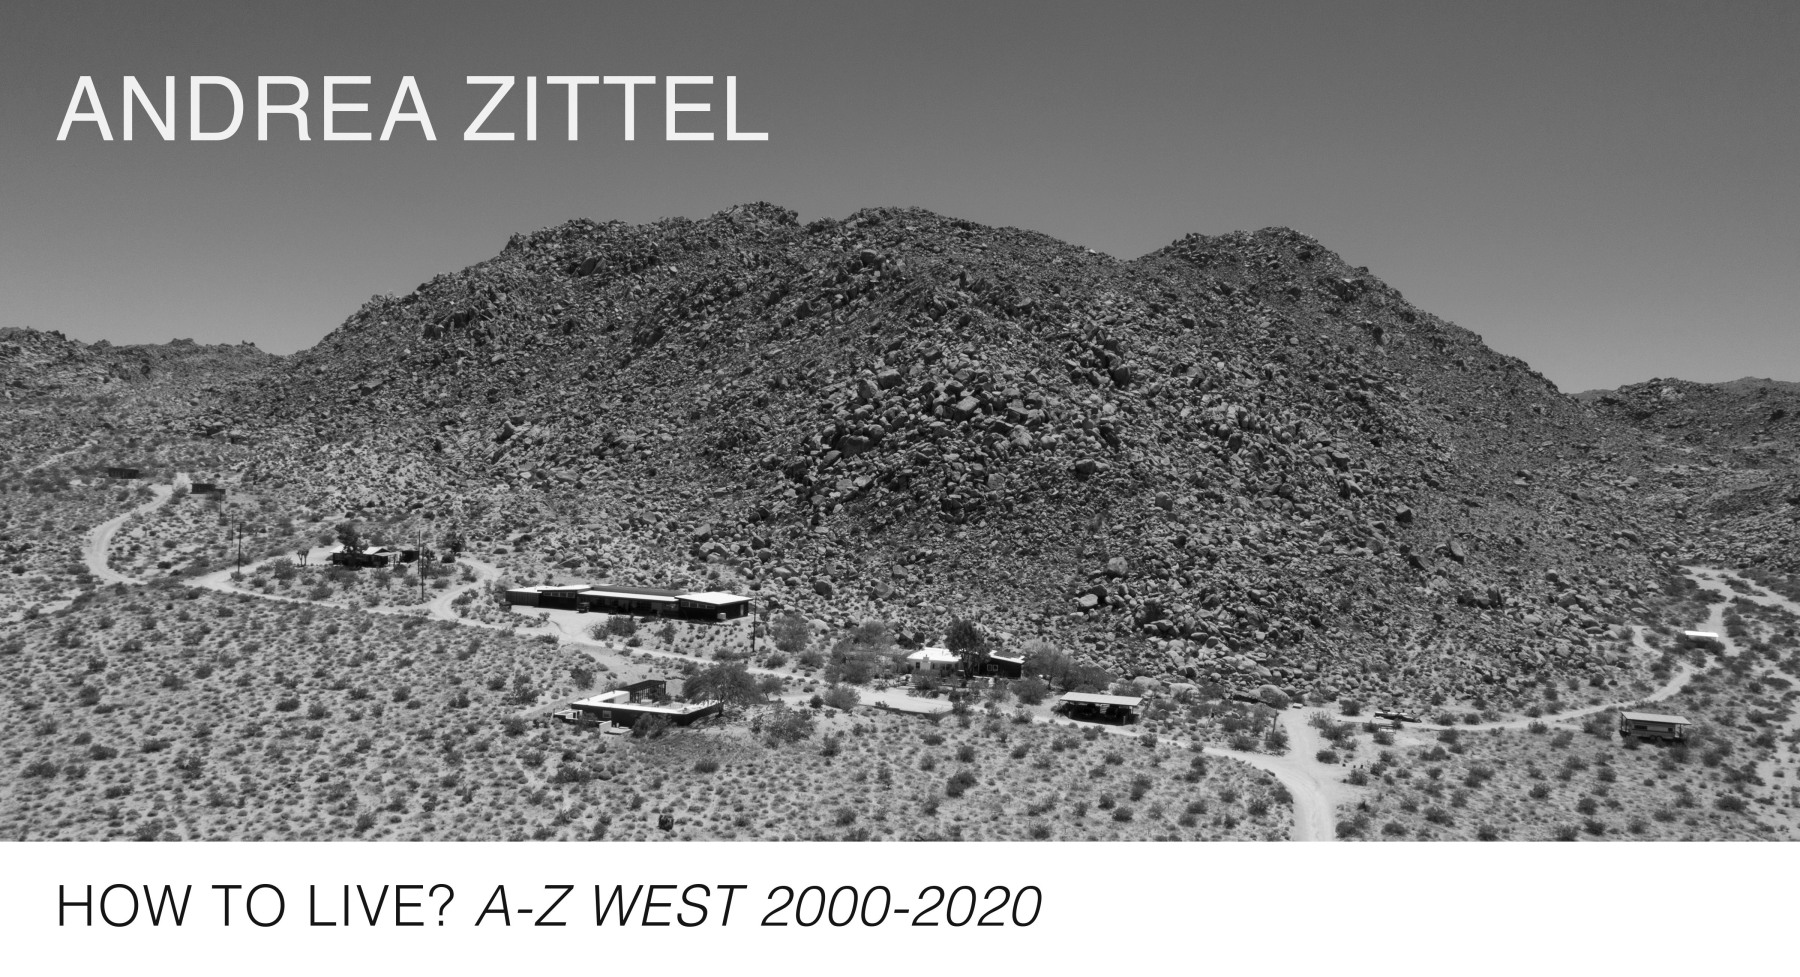 Andrea Zittel - How to Live? A-Z West 2000-2020 - Viewing Room - Regen Projects Viewing Room